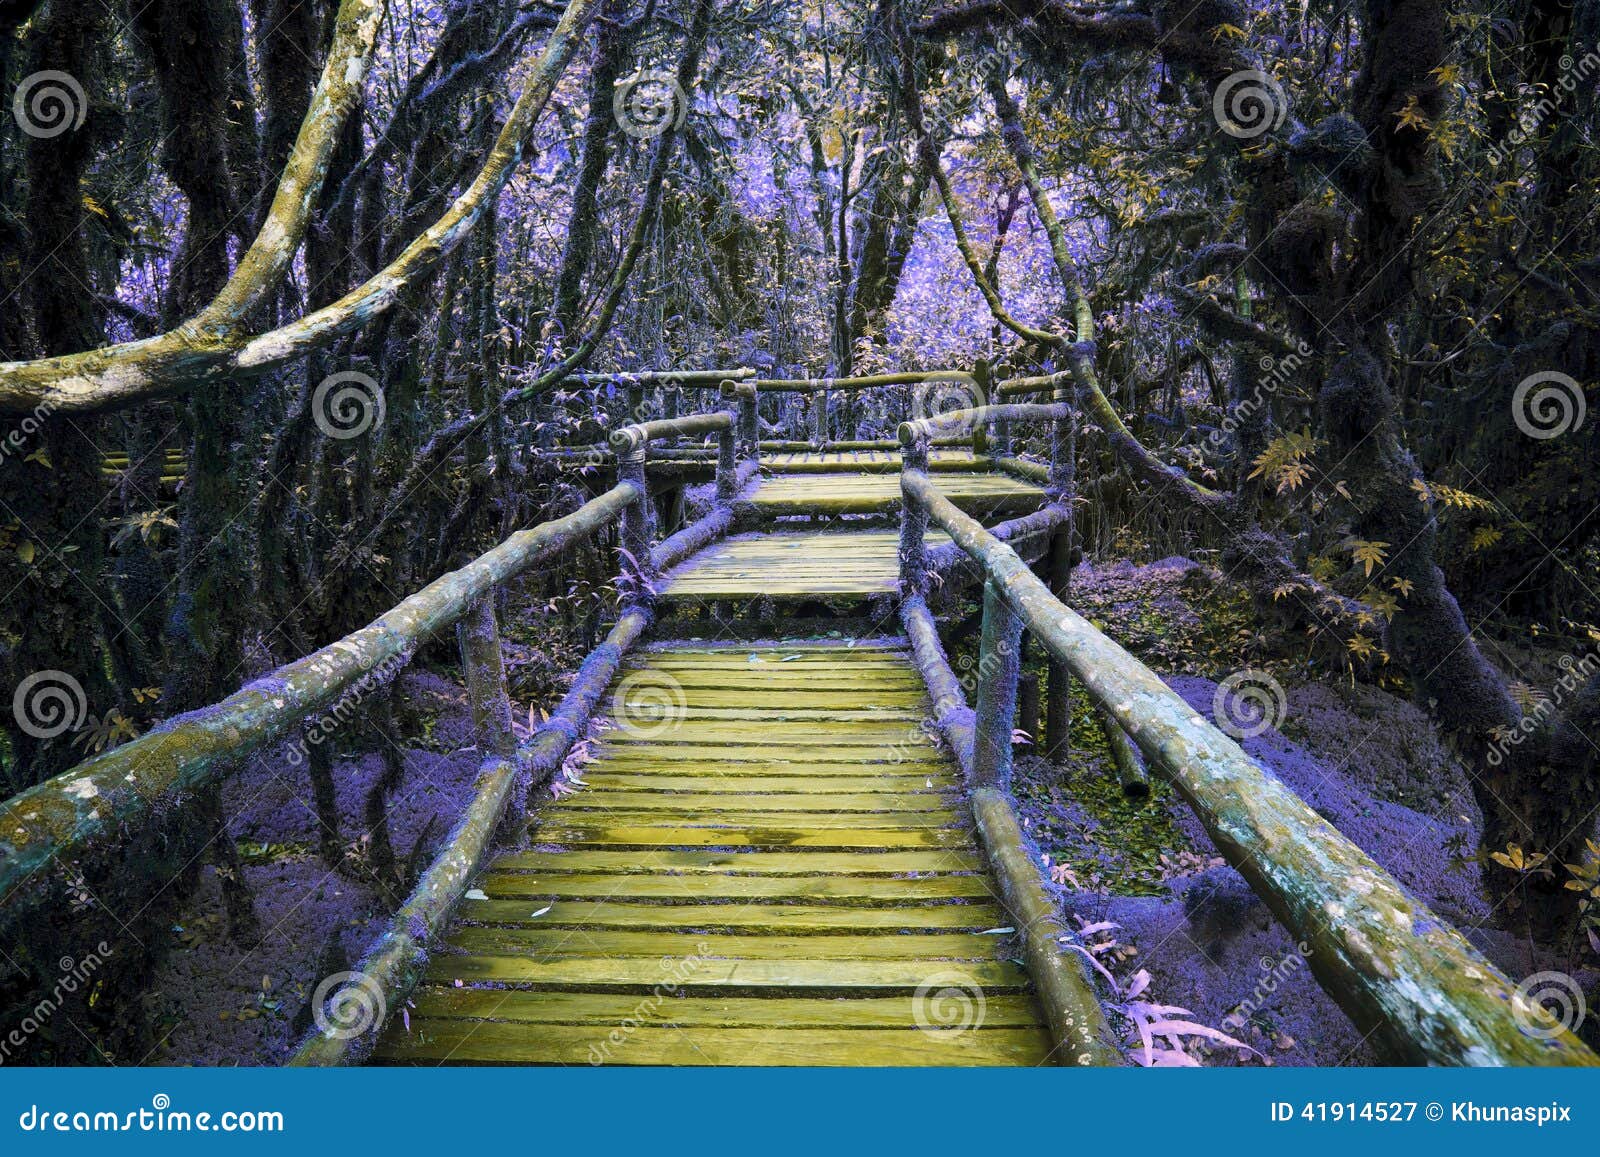 abstract color of wood bridge in hill rain forest with moisture plant